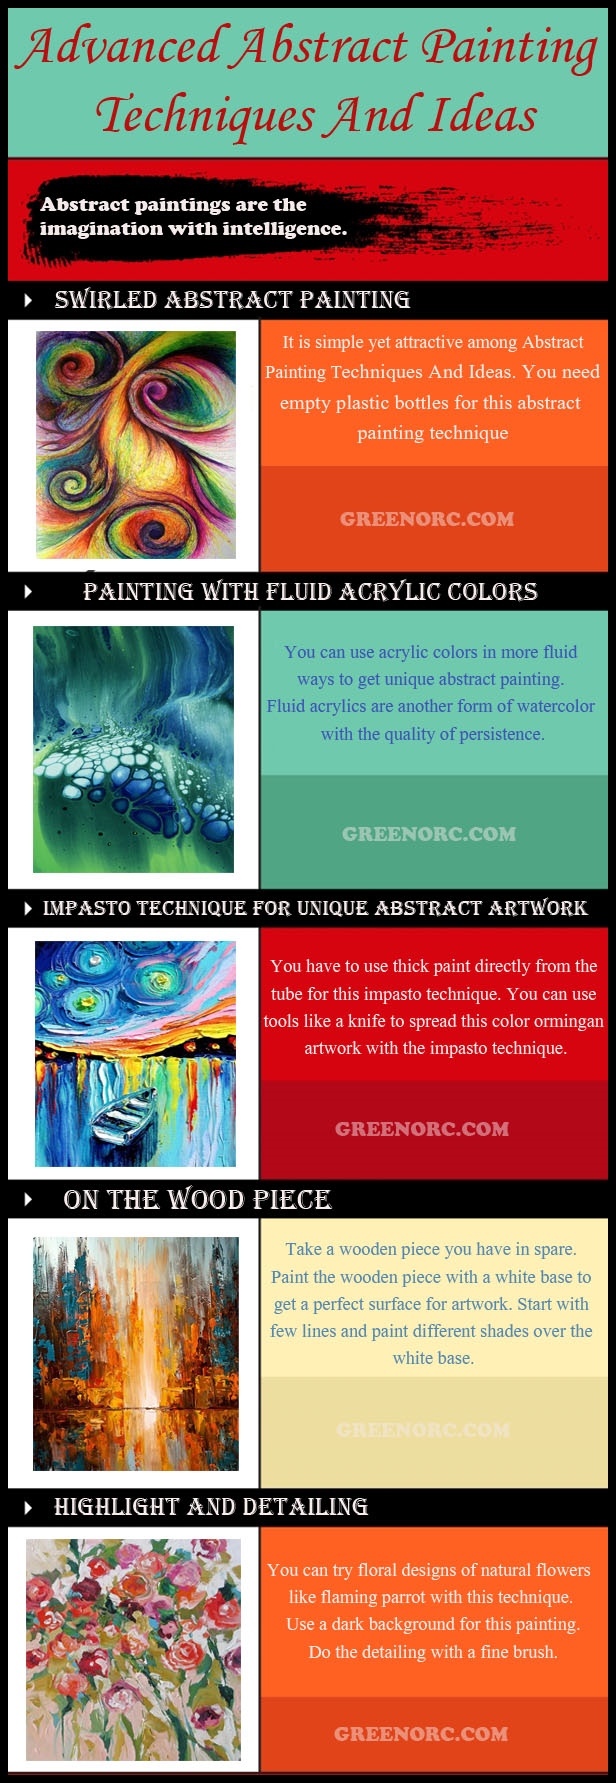 Advanced-Abstract-Painting-Techniques-And-Ideas